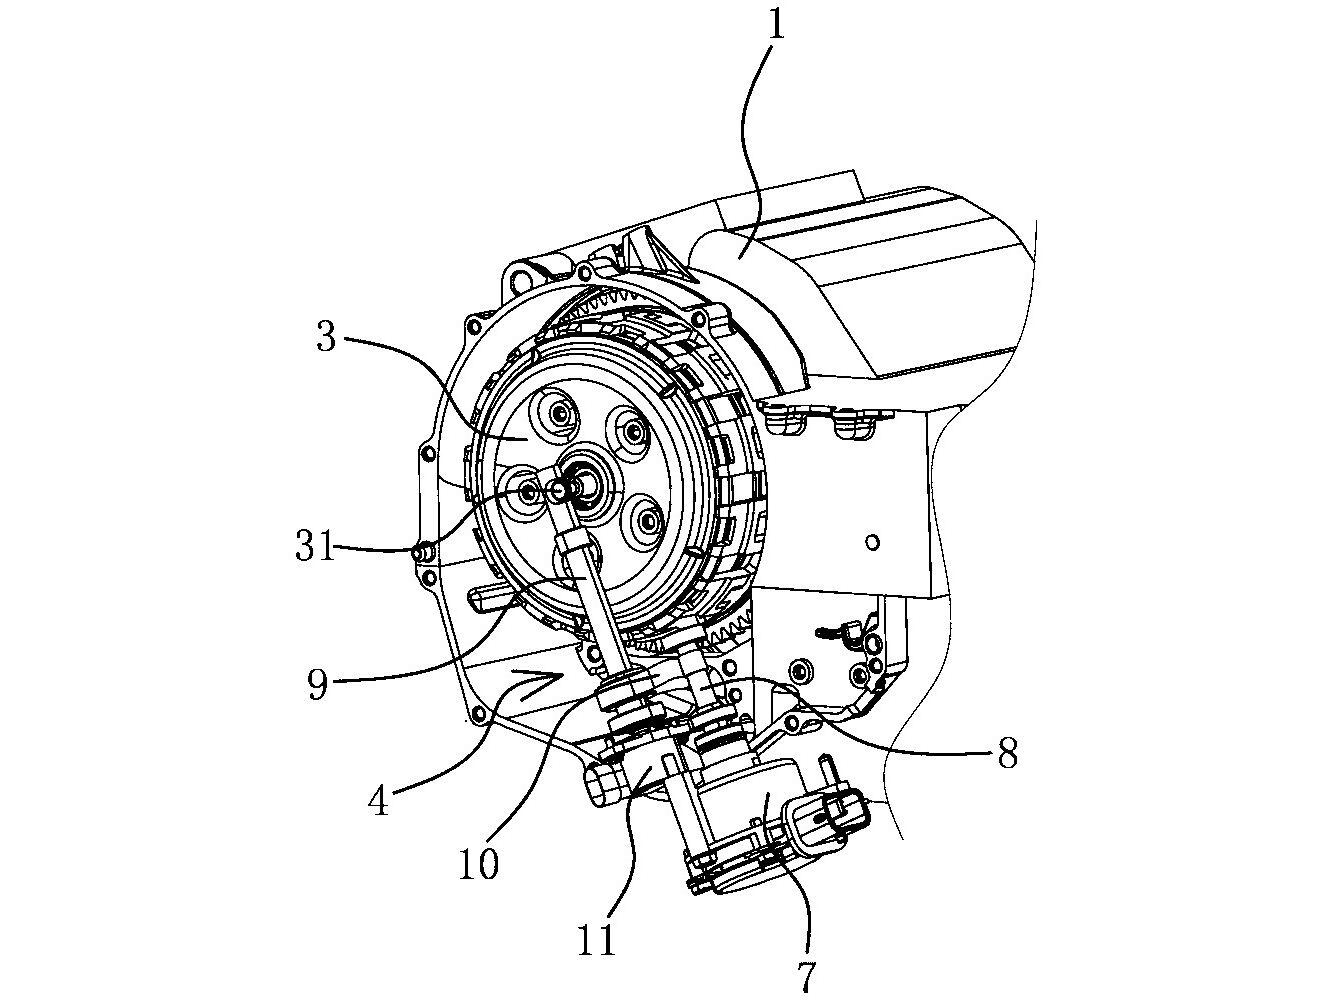 QJMotor’s patent is shown on its 700cc parallel-twin engine.